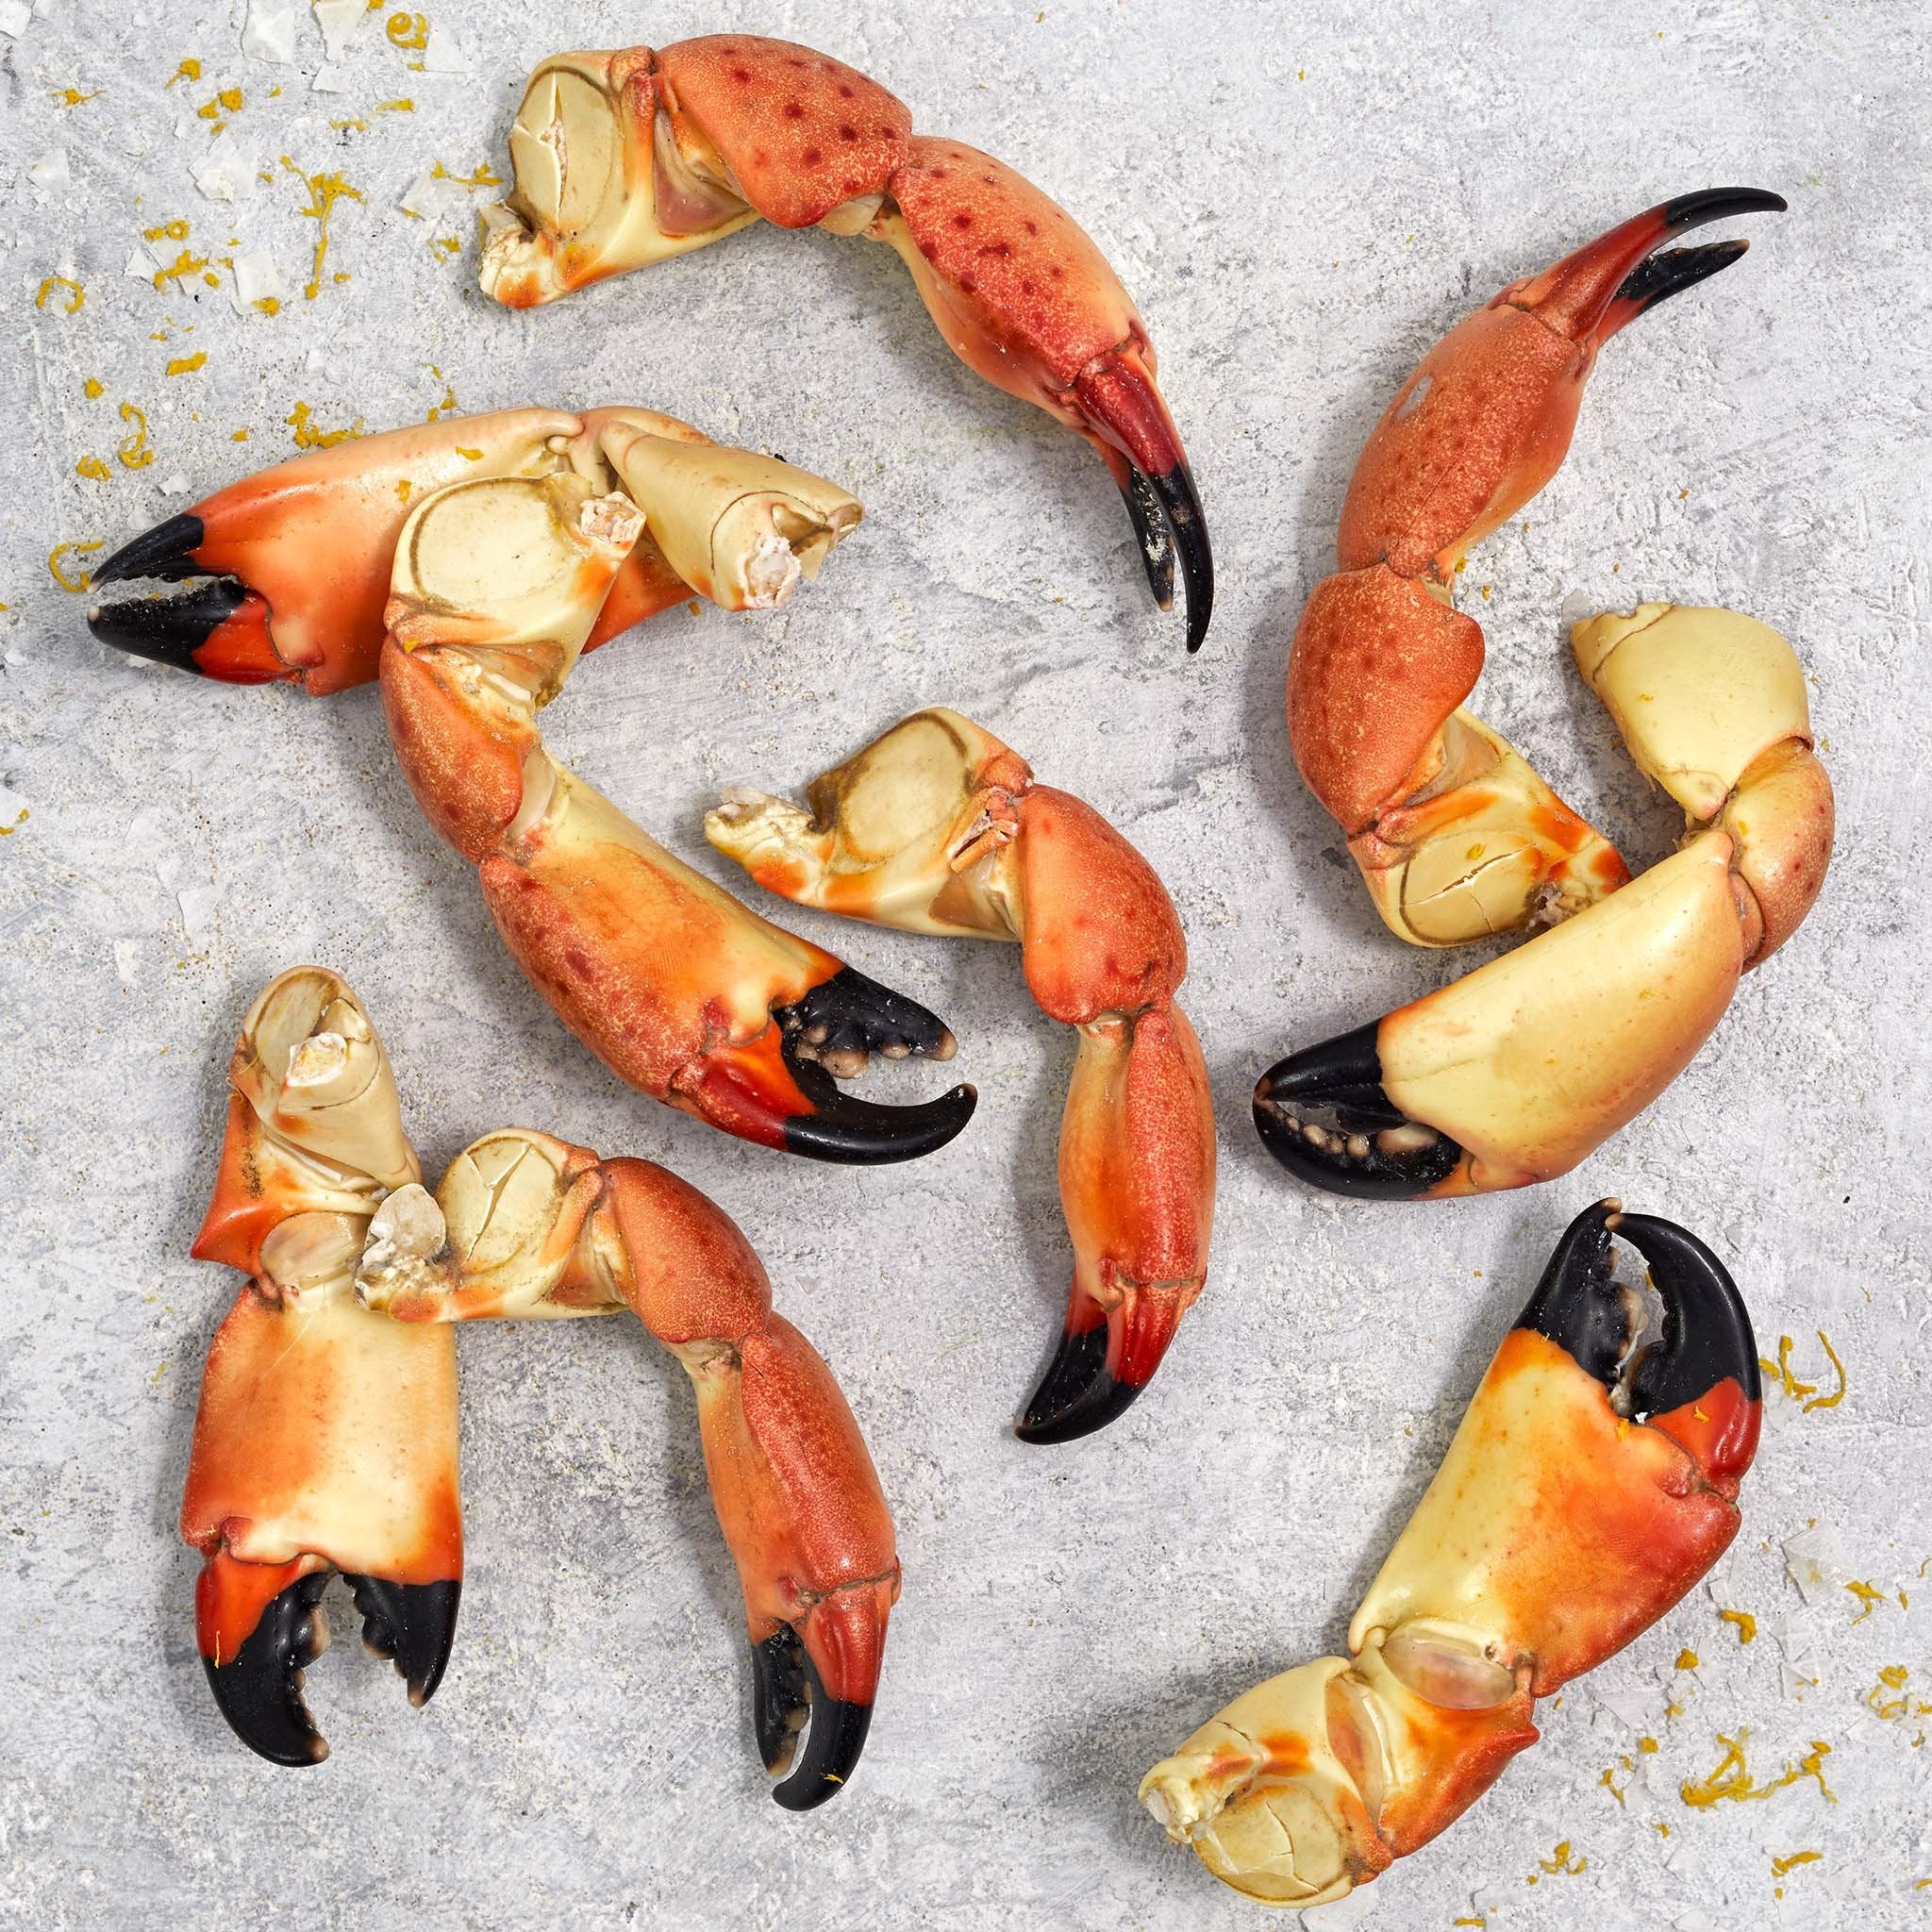 FULLY COOKED FLORIDA STONE CRAB CLAWS (10-14 PC)